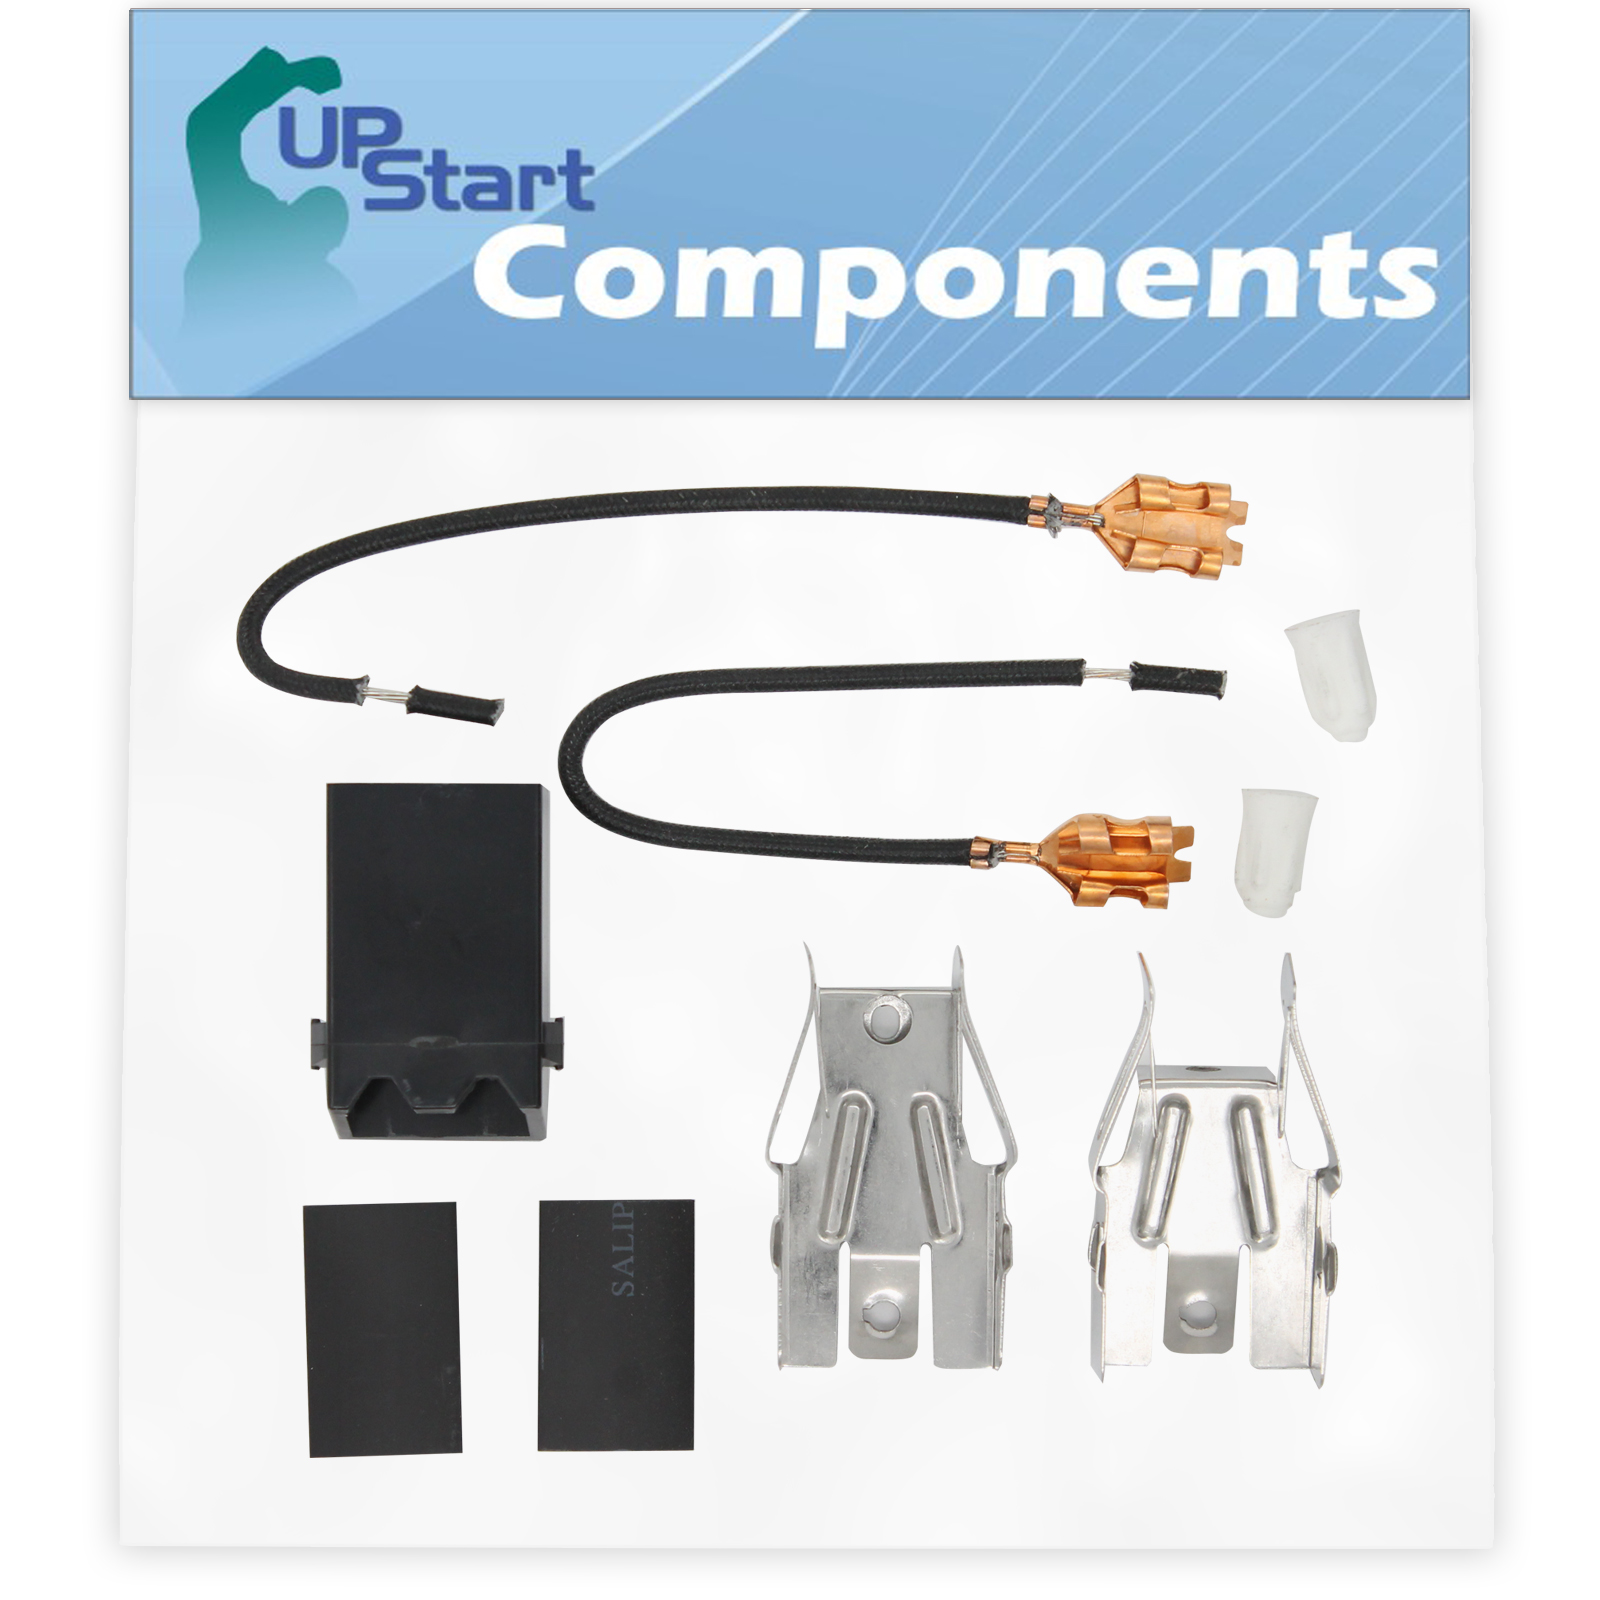 330031 Top Burner Receptacle Kit Replacement for Whirlpool RF360BXYN0 Range/Cooktop/Oven - Compatible with 330031 Range Burner Receptacle Kit - UpStart Components Brand - image 1 of 4